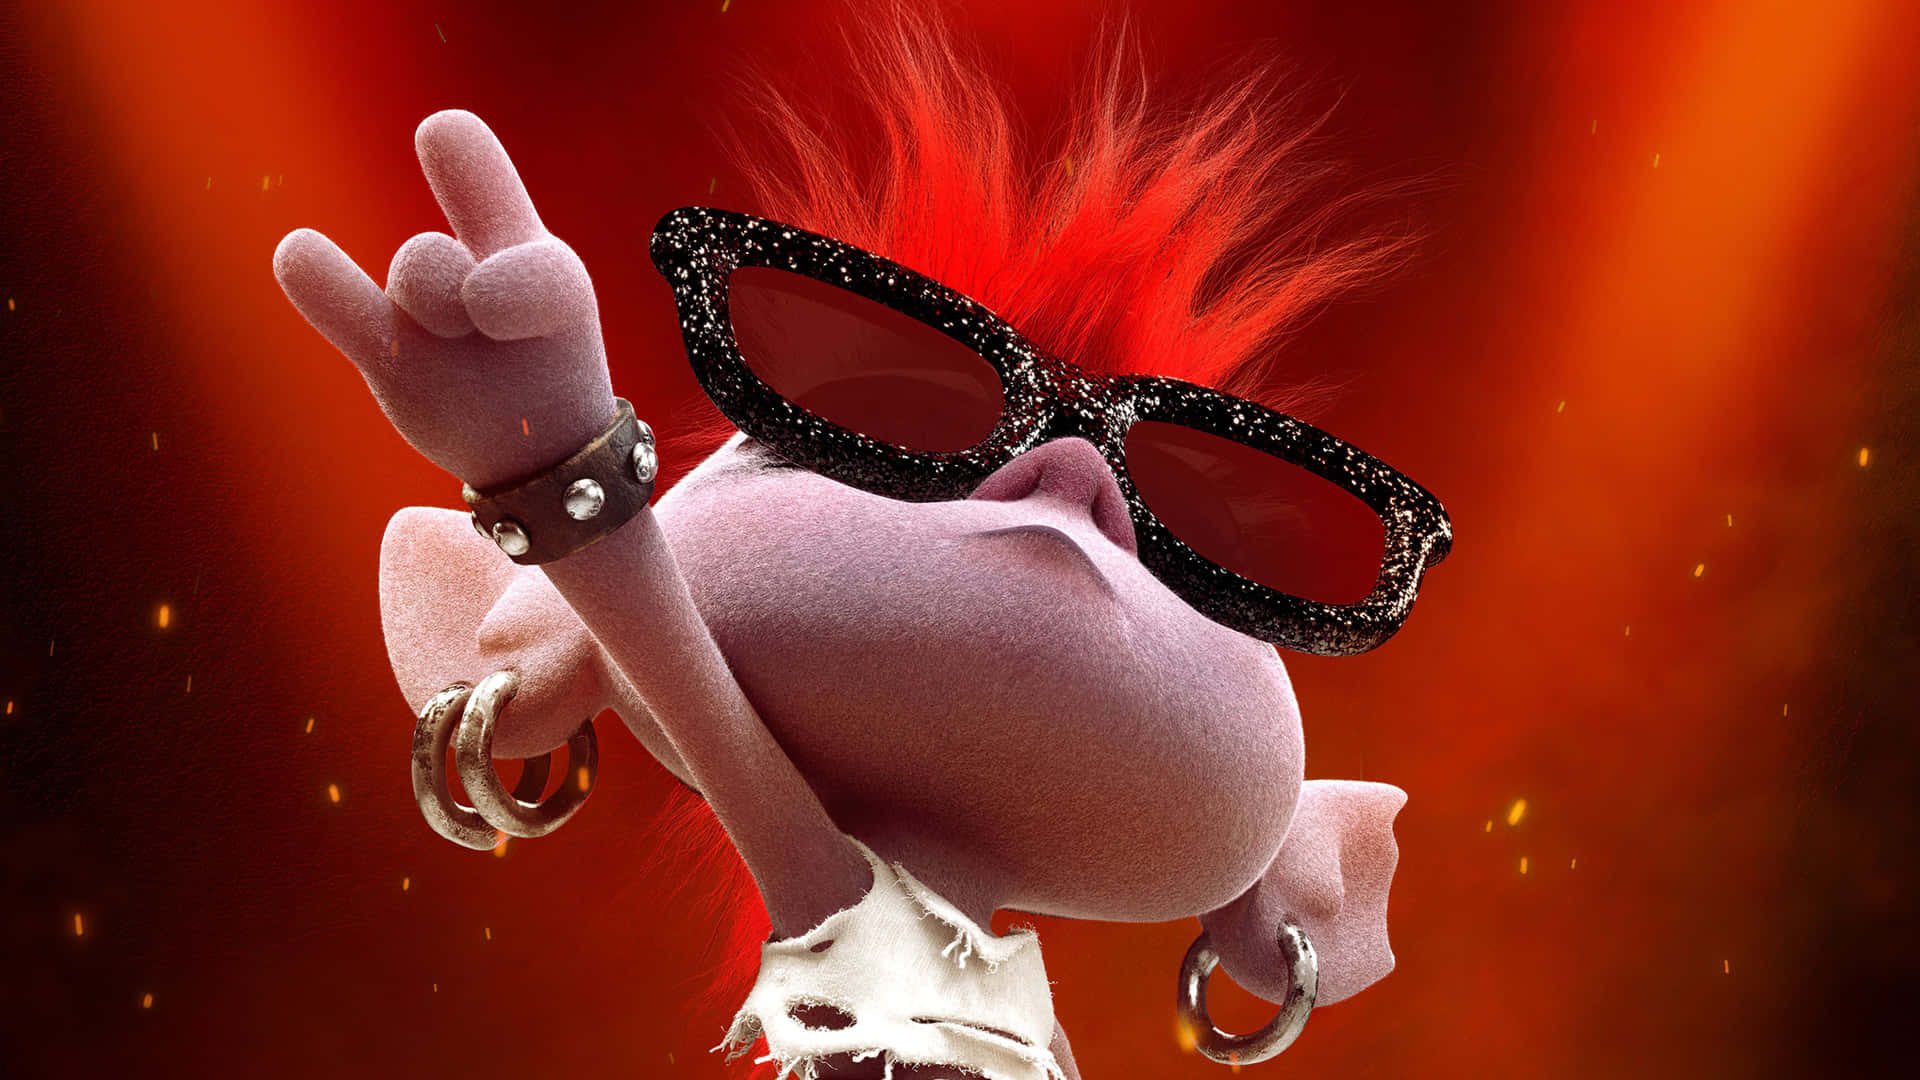 A Cartoon Character With Red Hair And Sunglasses